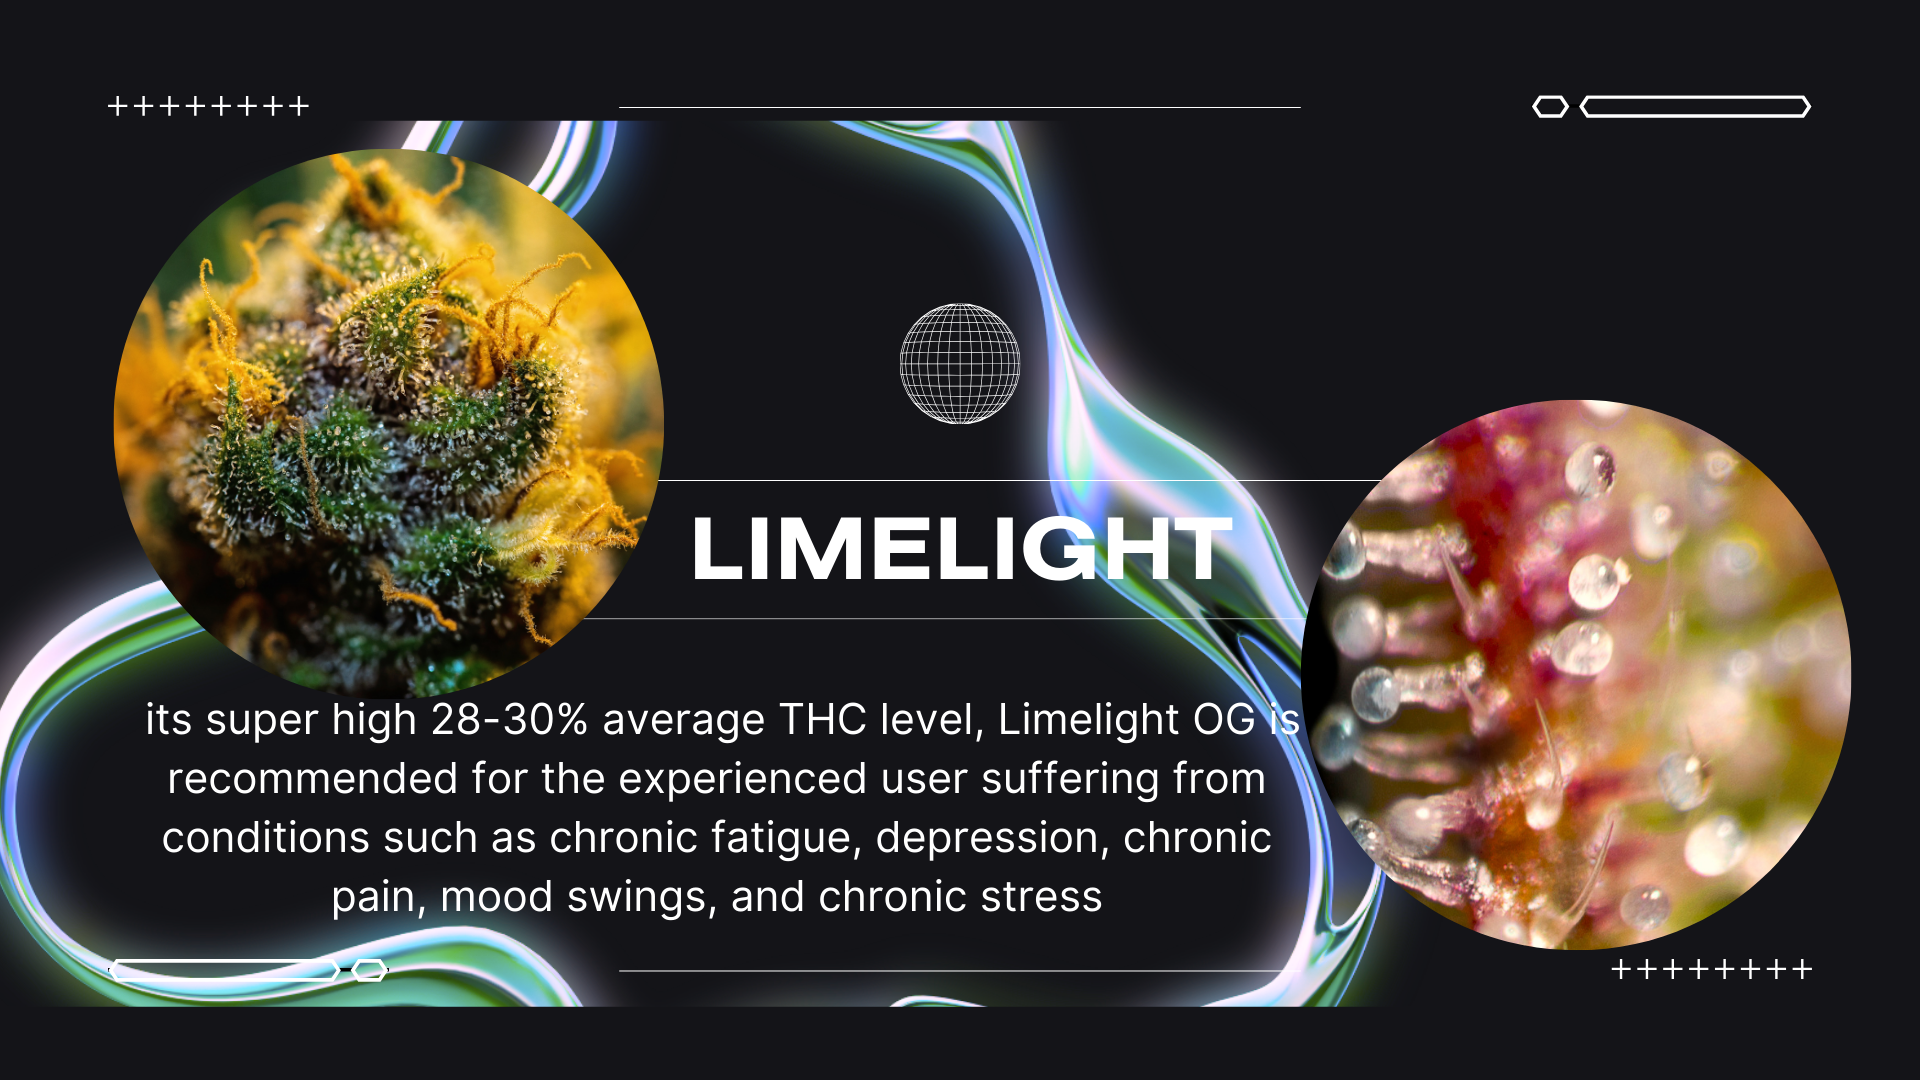 its super high 28-30% average THC level, Limelight OG is recommended for the experienced user suffering from conditions such as chronic fatigue, depression, chronic pain, mood swings, and chronic stress